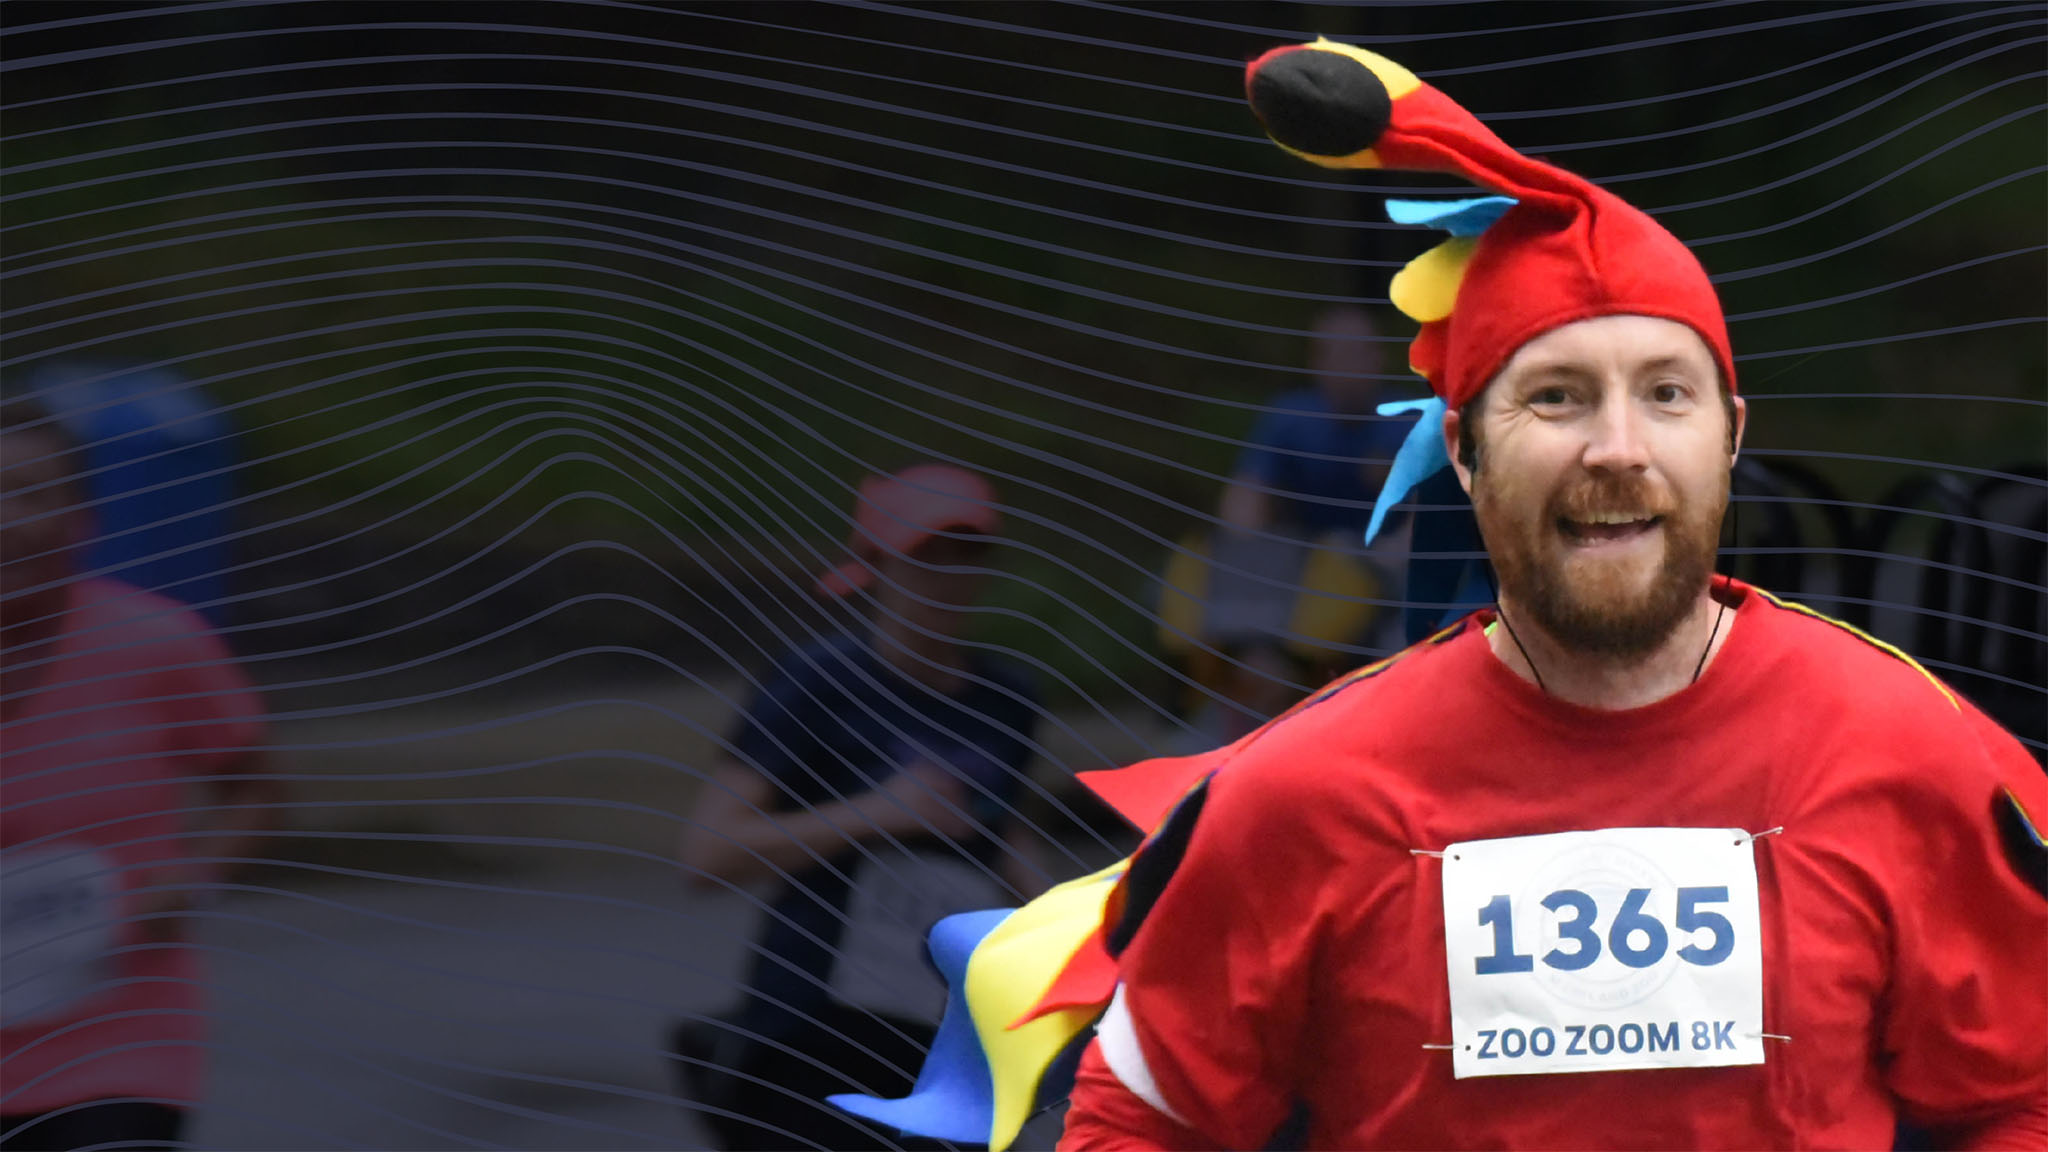 man running in a parrot costume